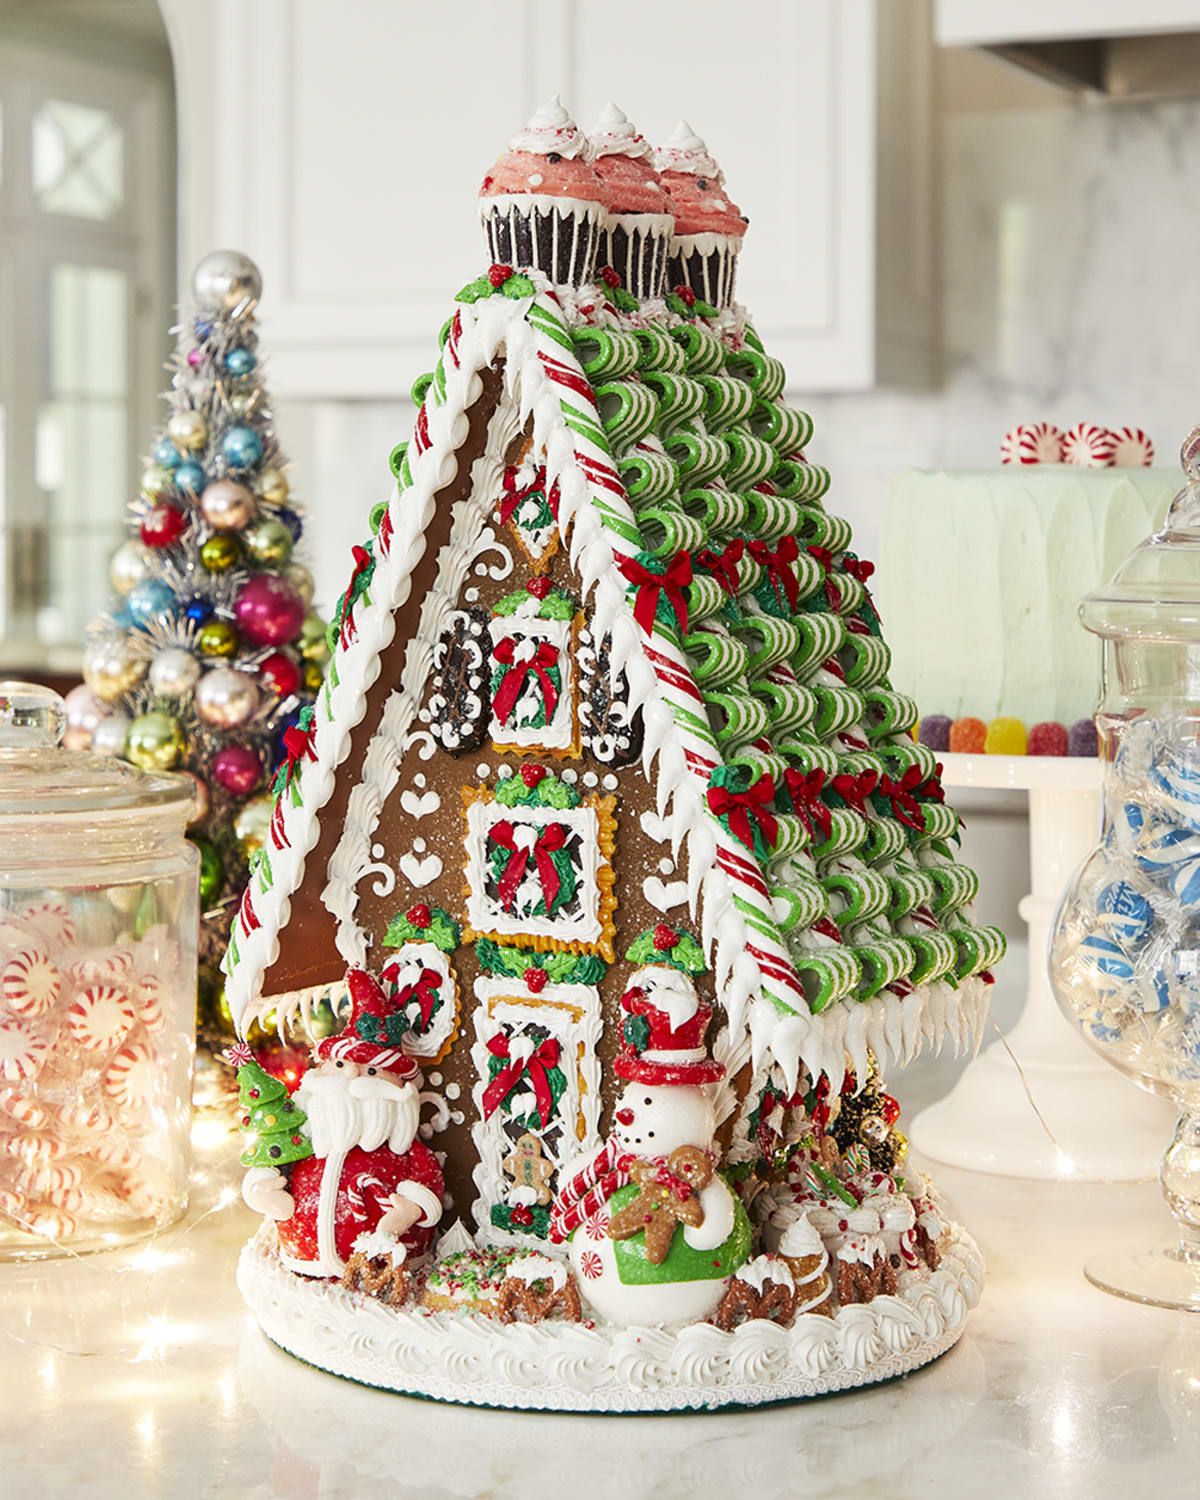 Sweet Savannah One-of-a-Kind "Gingerbread" House, Large | Neiman Marcus